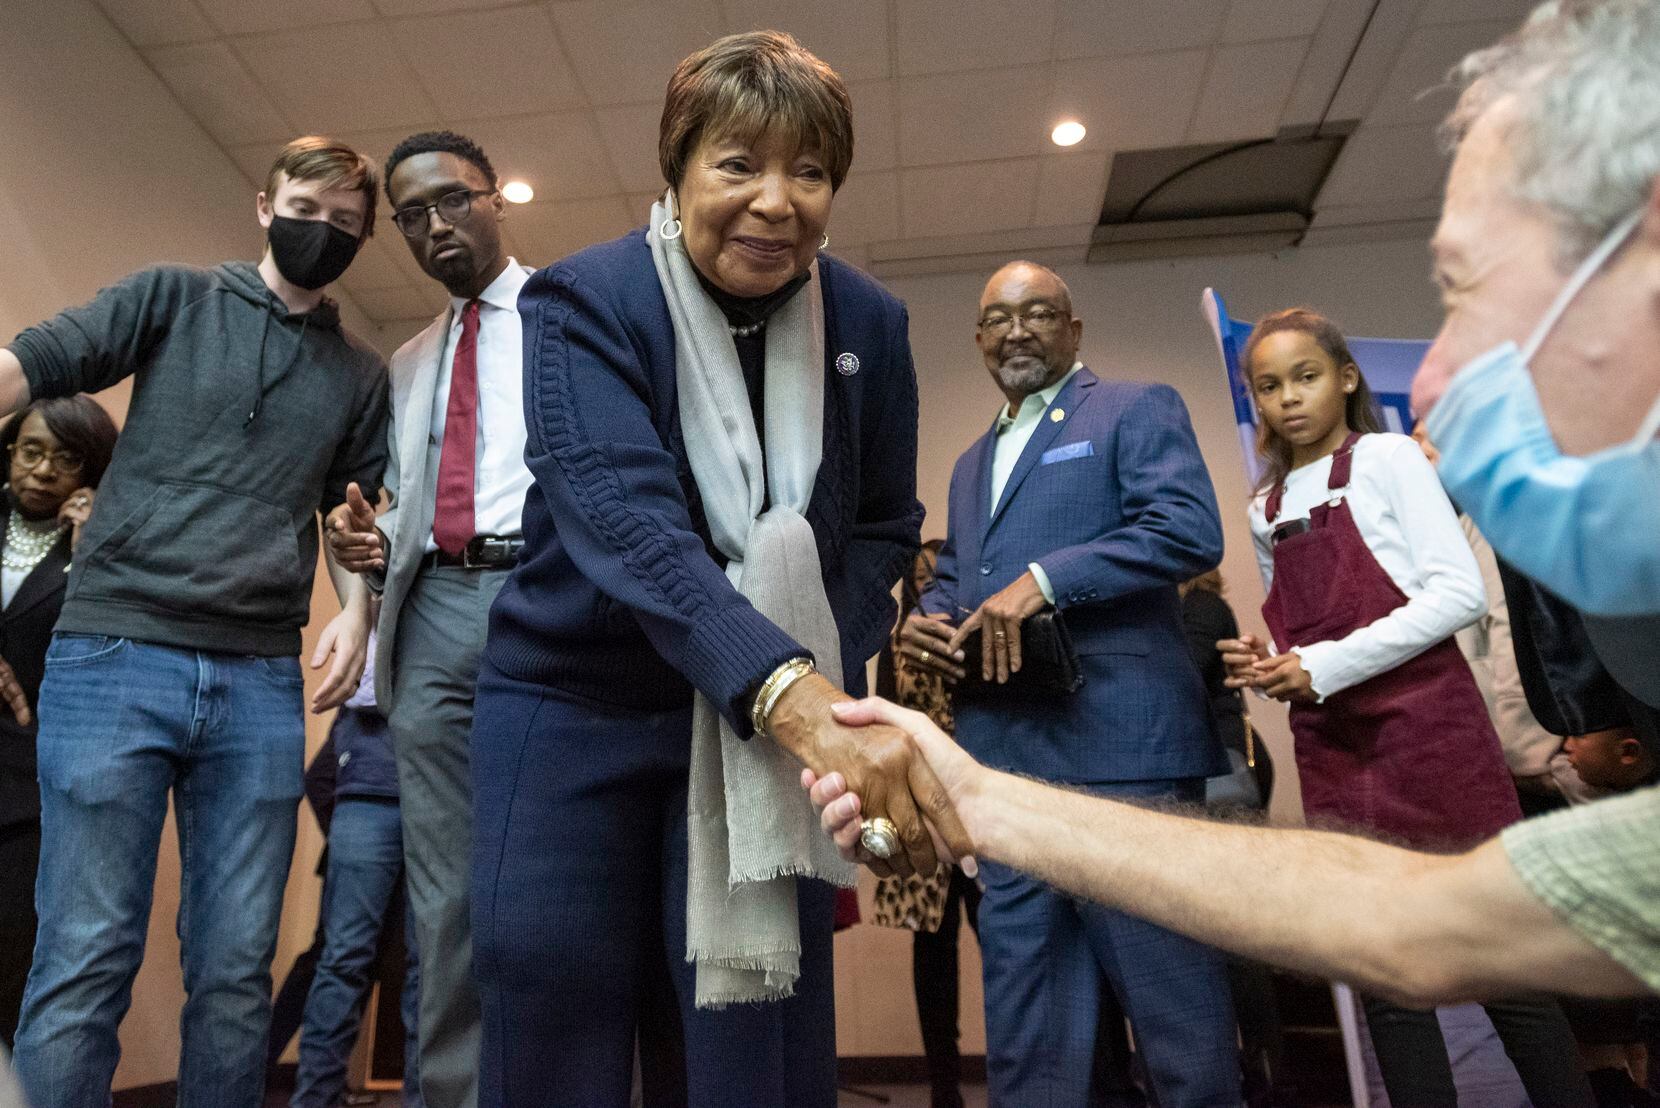 U.S. Rep. Eddie Bernice Johnson was congratulated by friends and colleagues after she...